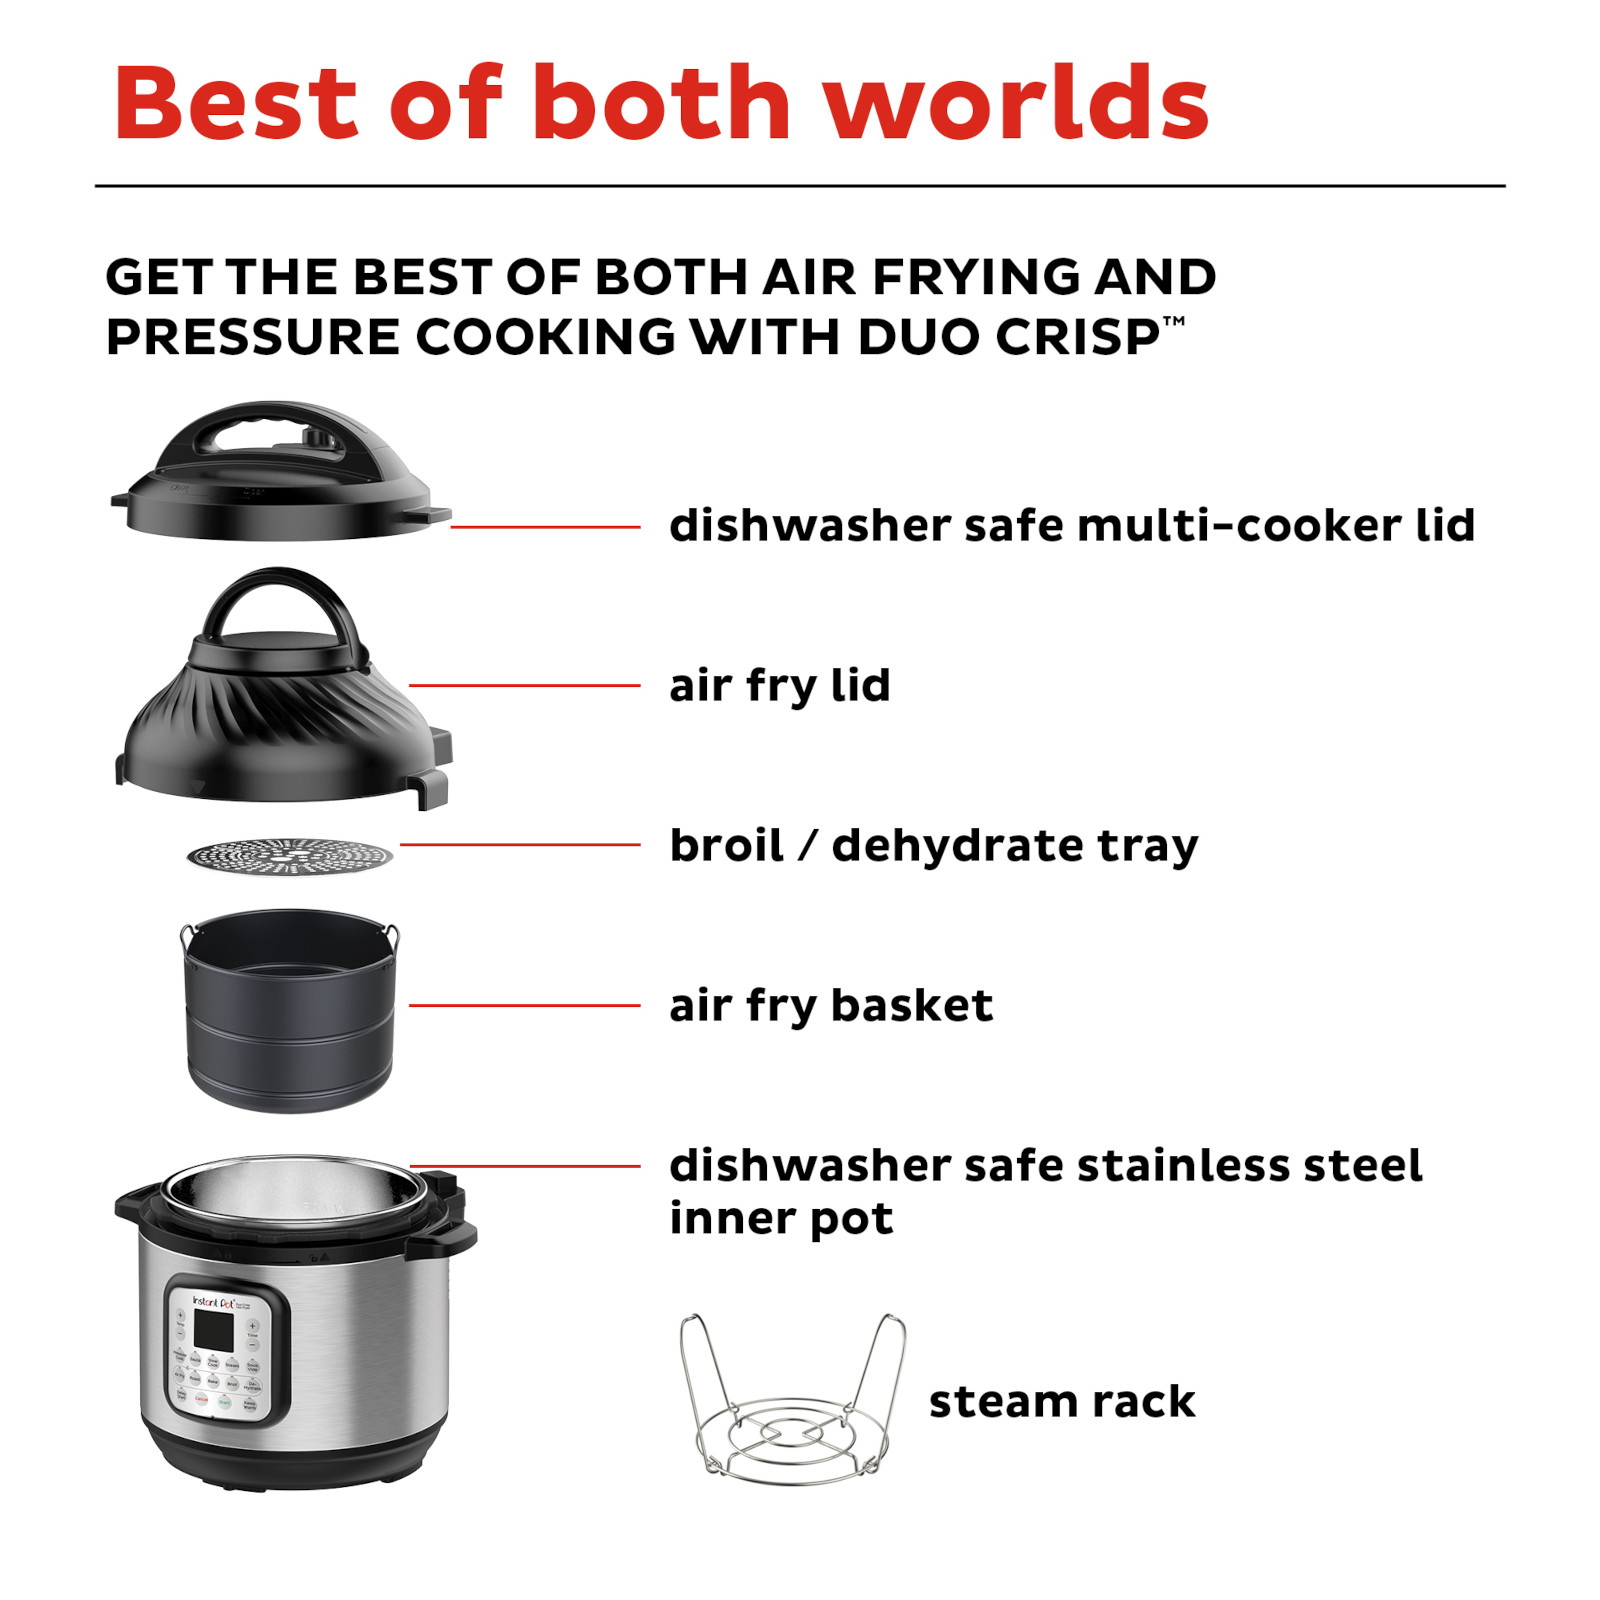 Instant Pot Duo Crisp 6-Quart 11-in-1 Air Fryer and Electric Pressure Cooker Combo with Multicooker Lids - image 7 of 8